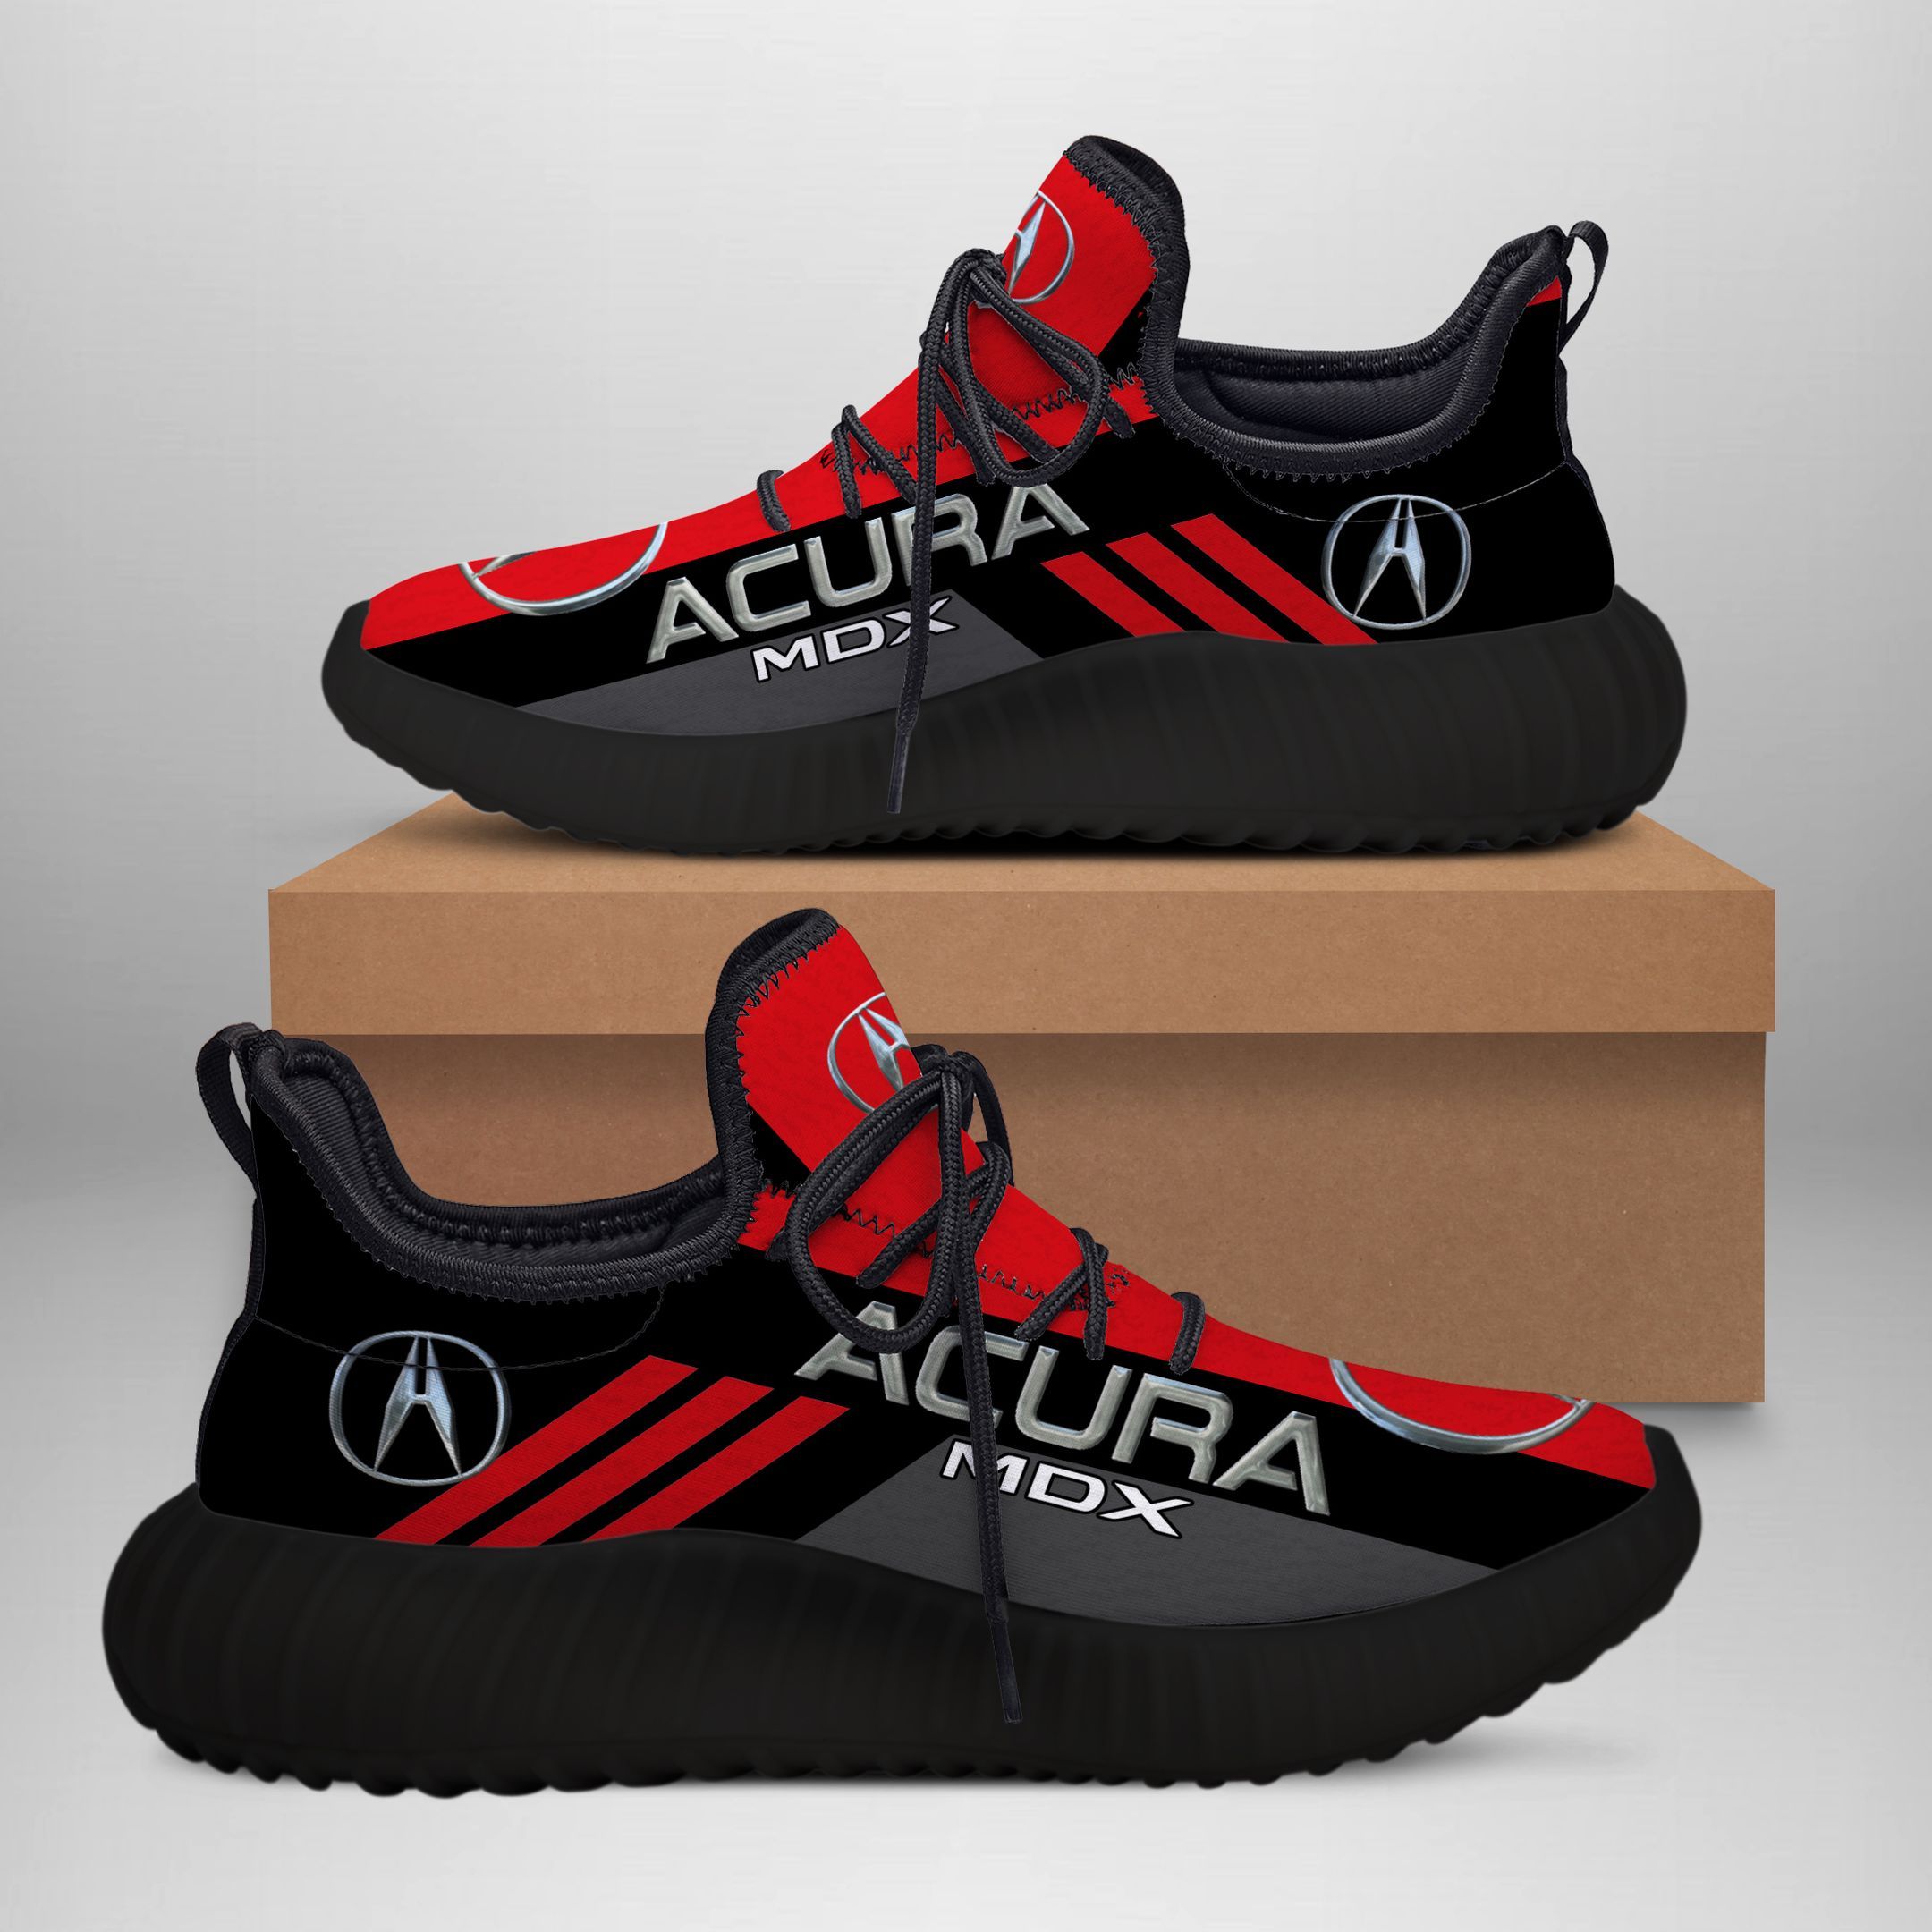 Acura Mdx Nqp-Lt Yz Boosts Ver 1 (Red)